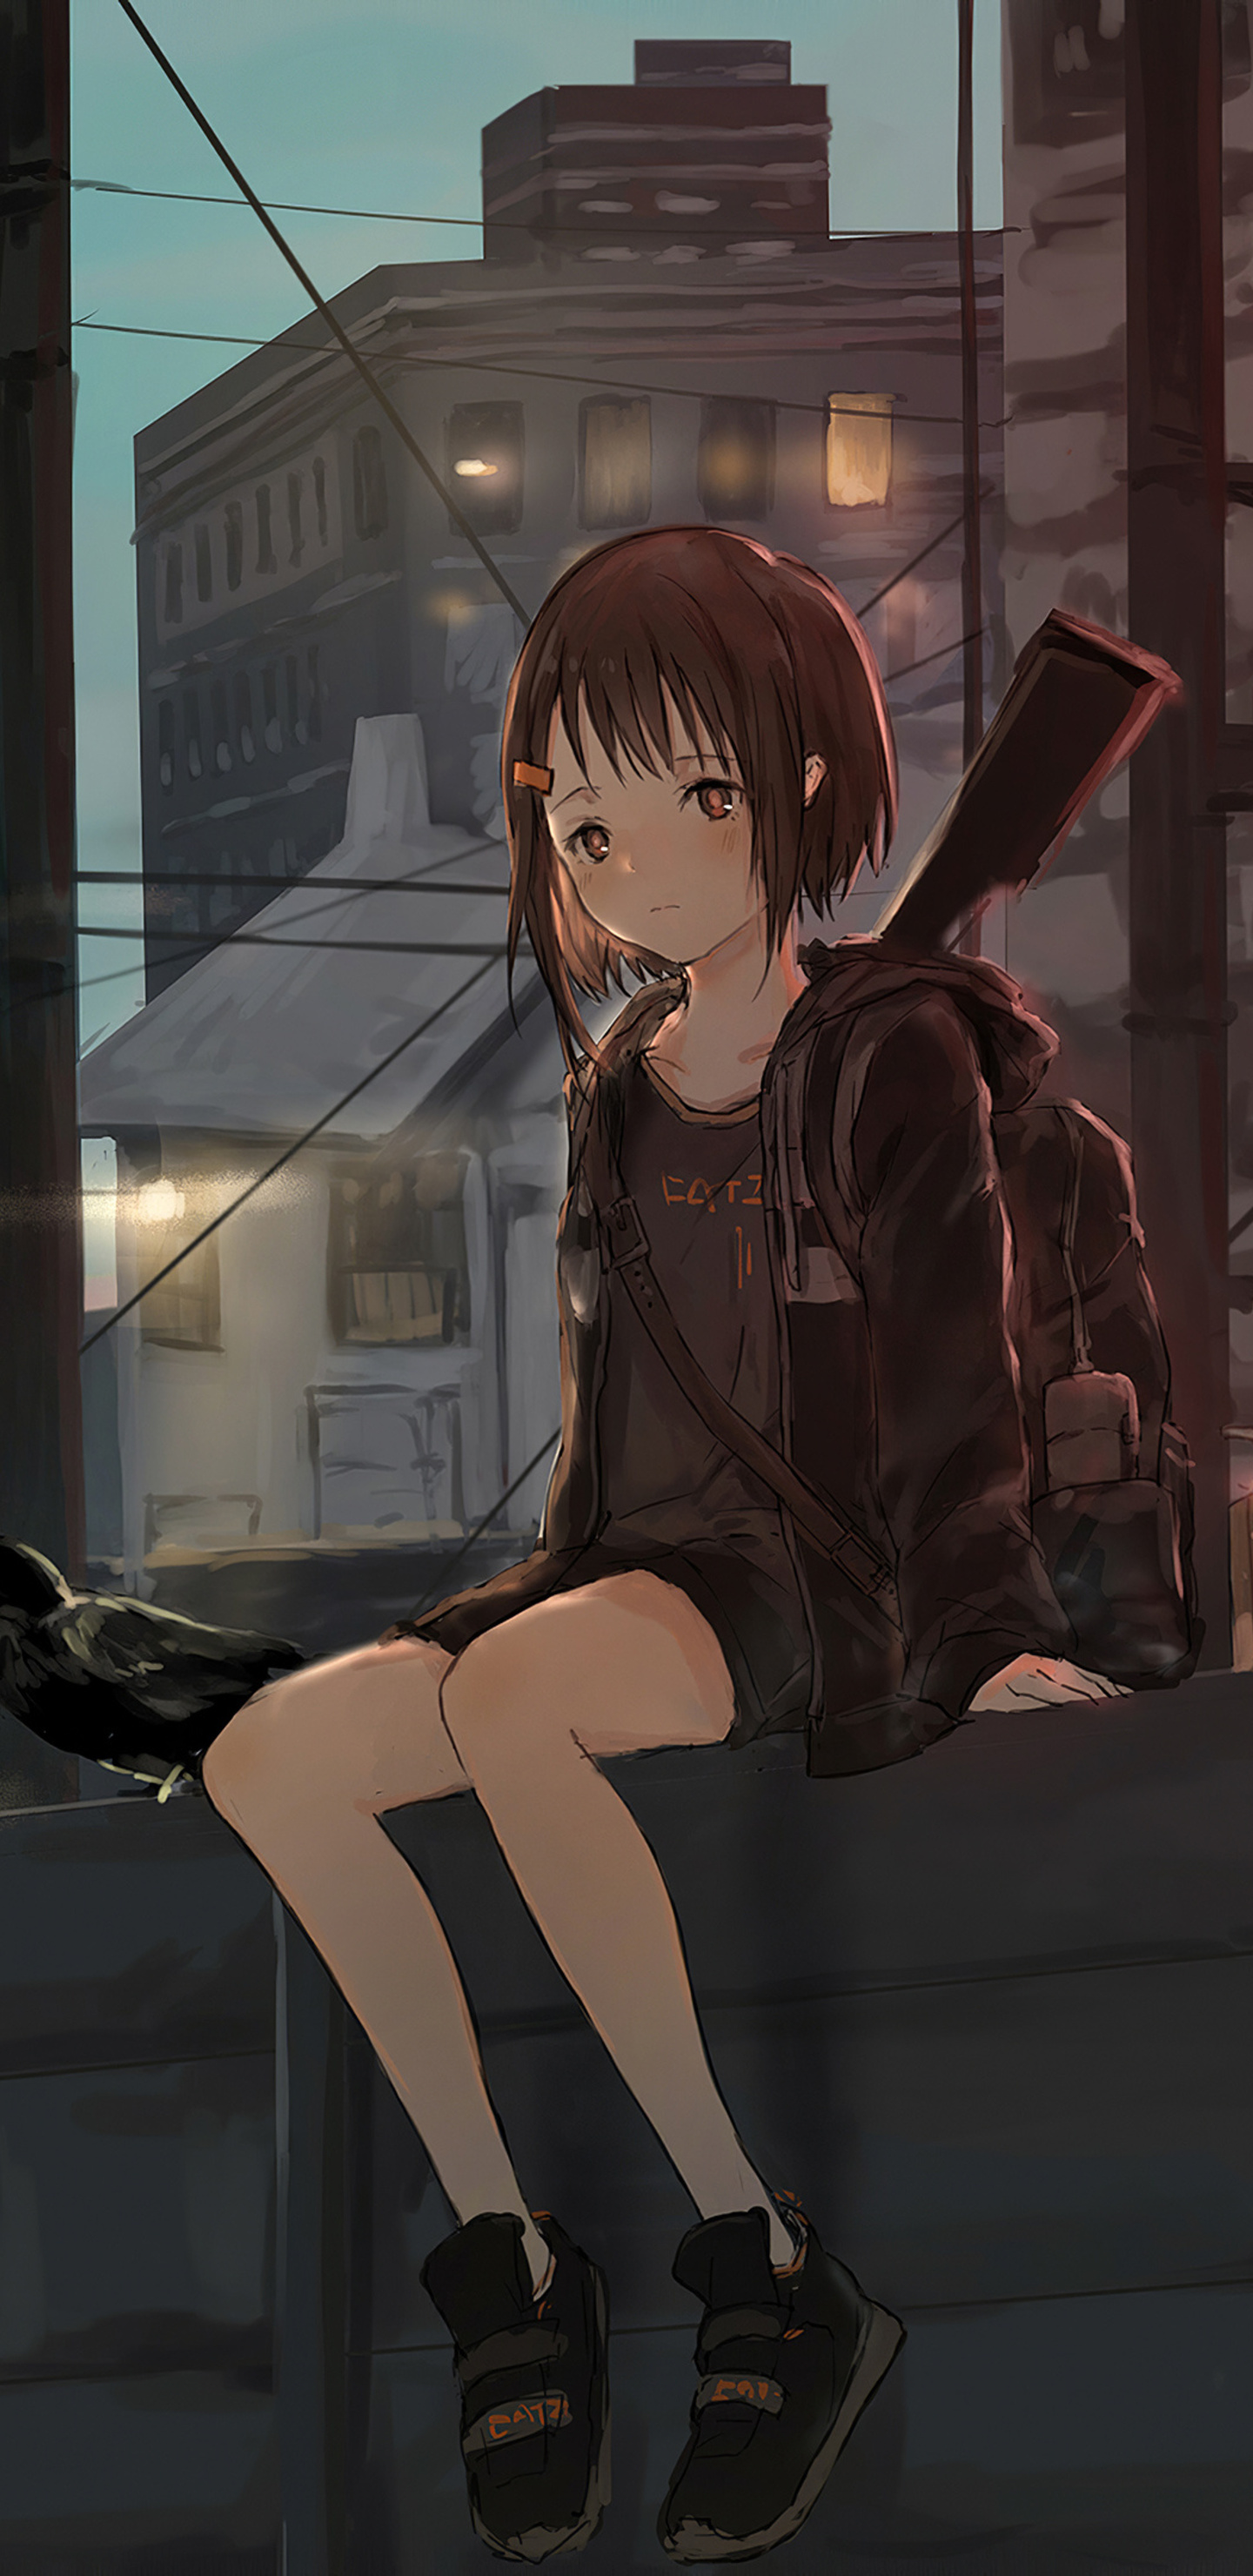 1440x2960 Anime Girl Sitting Alone Roof Sad 4k Samsung Galaxy Note 9,8,  S9,S8,S8+ QHD HD 4k Wallpapers, Images, Backgrounds, Photos and Pictures